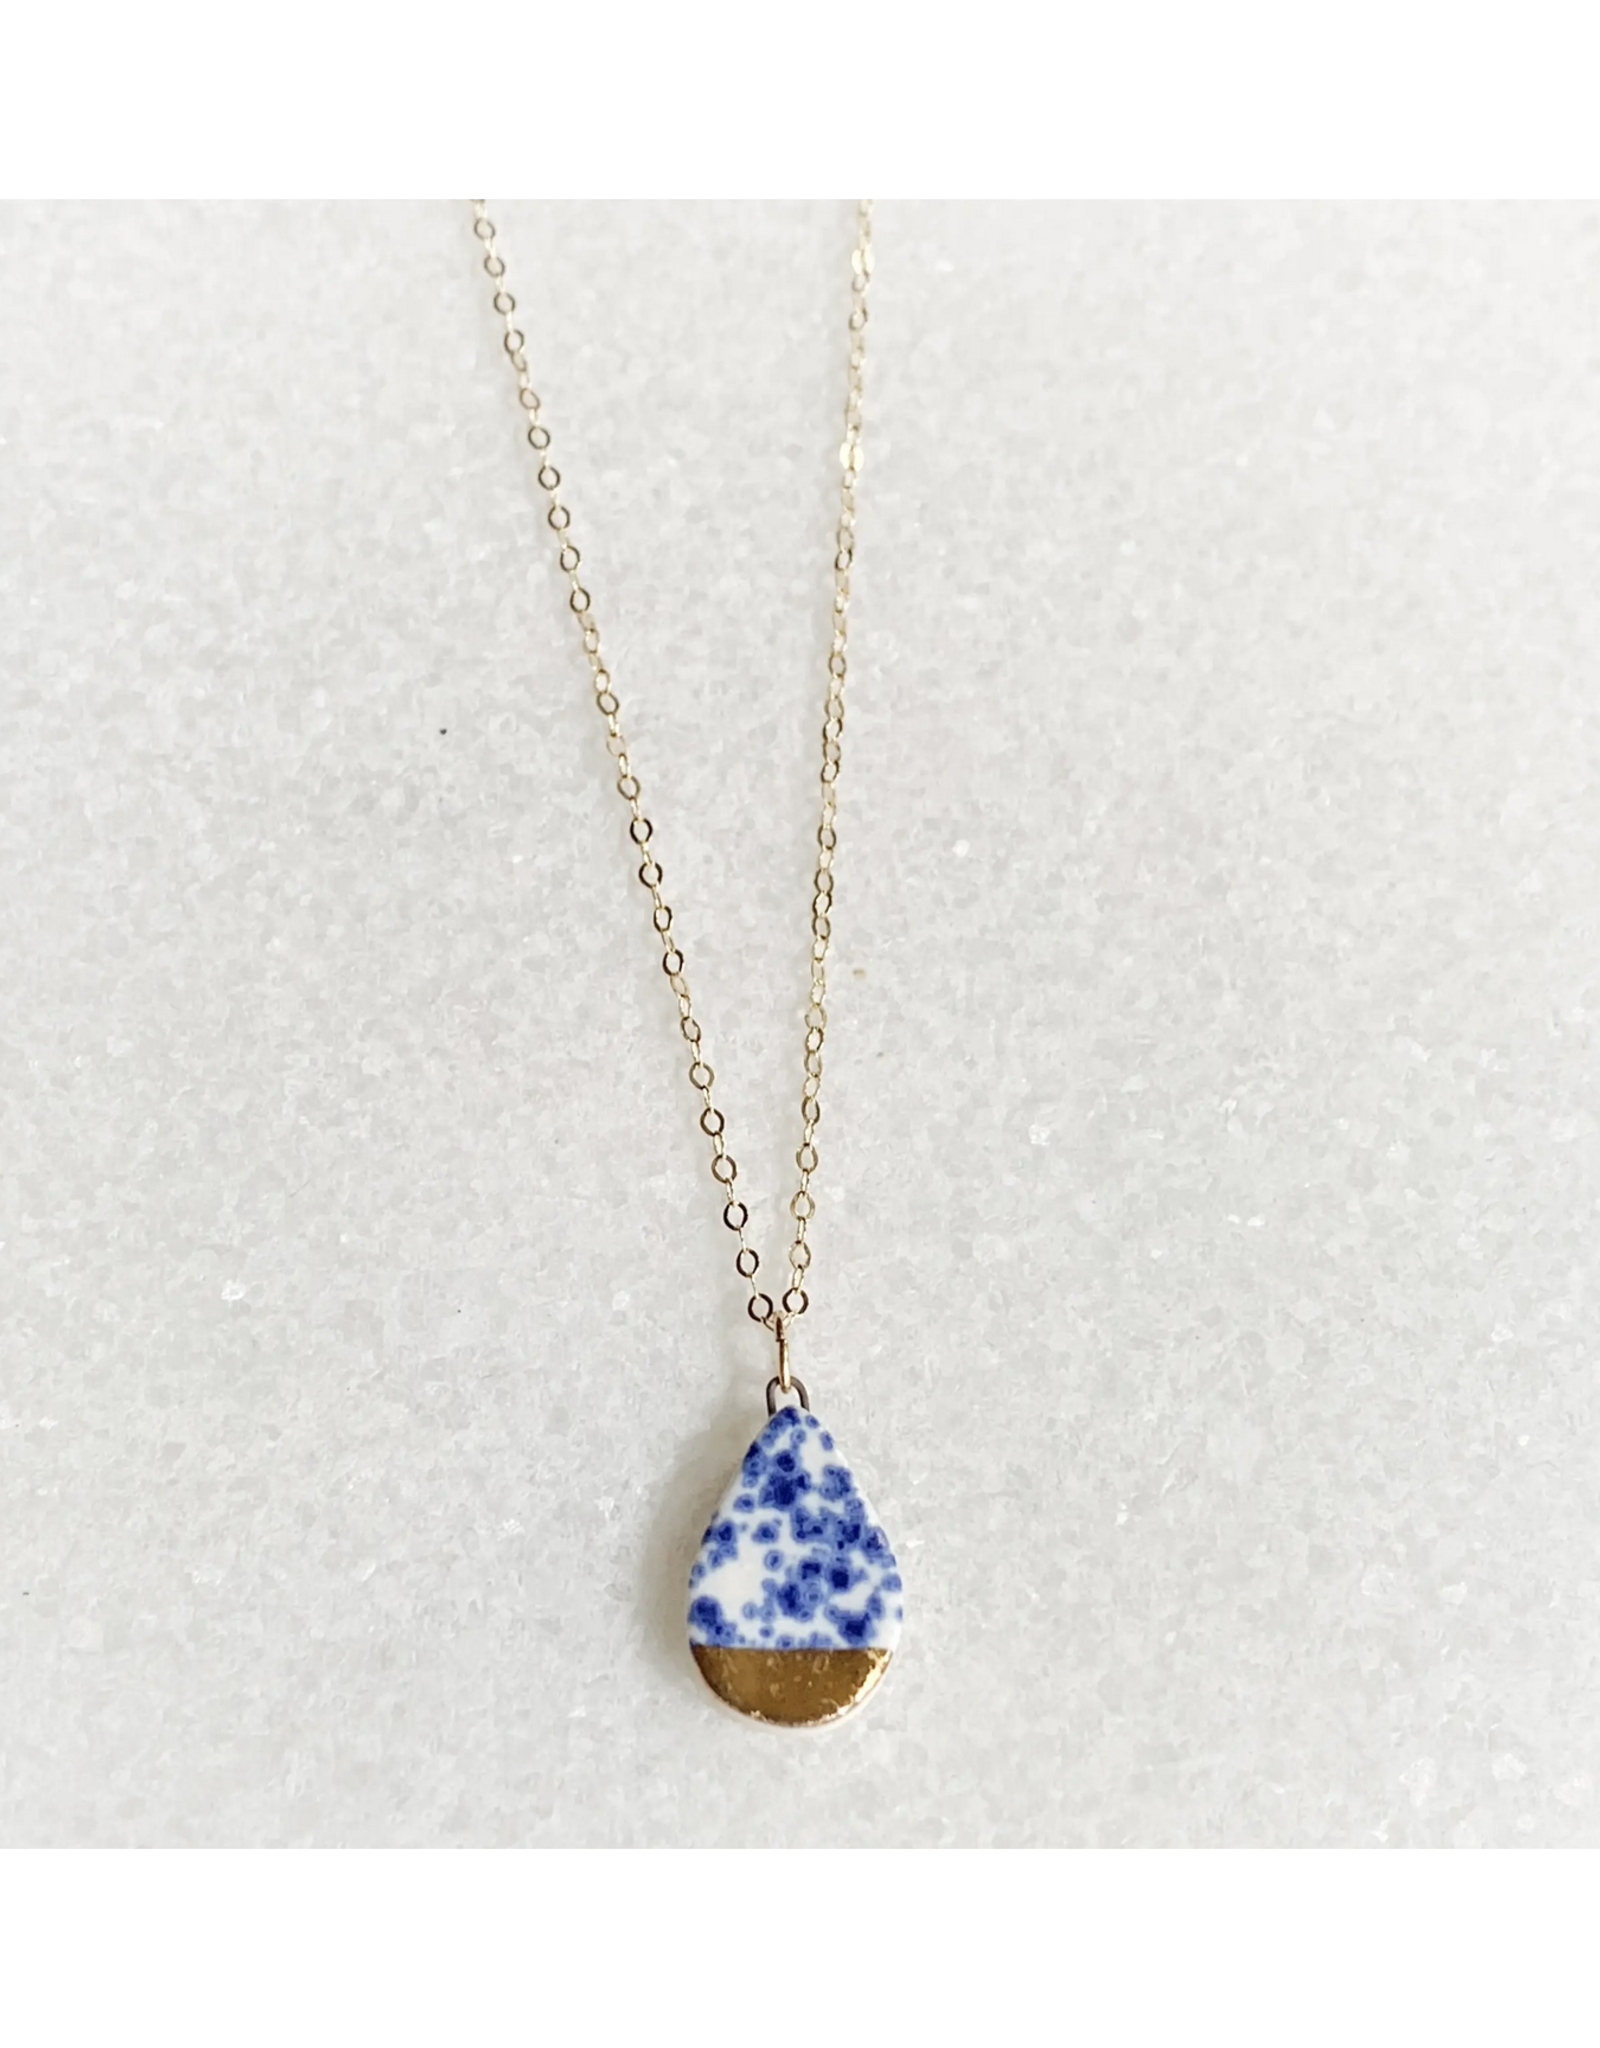 Small Teardrop Necklace - Blue Speckle/Gold